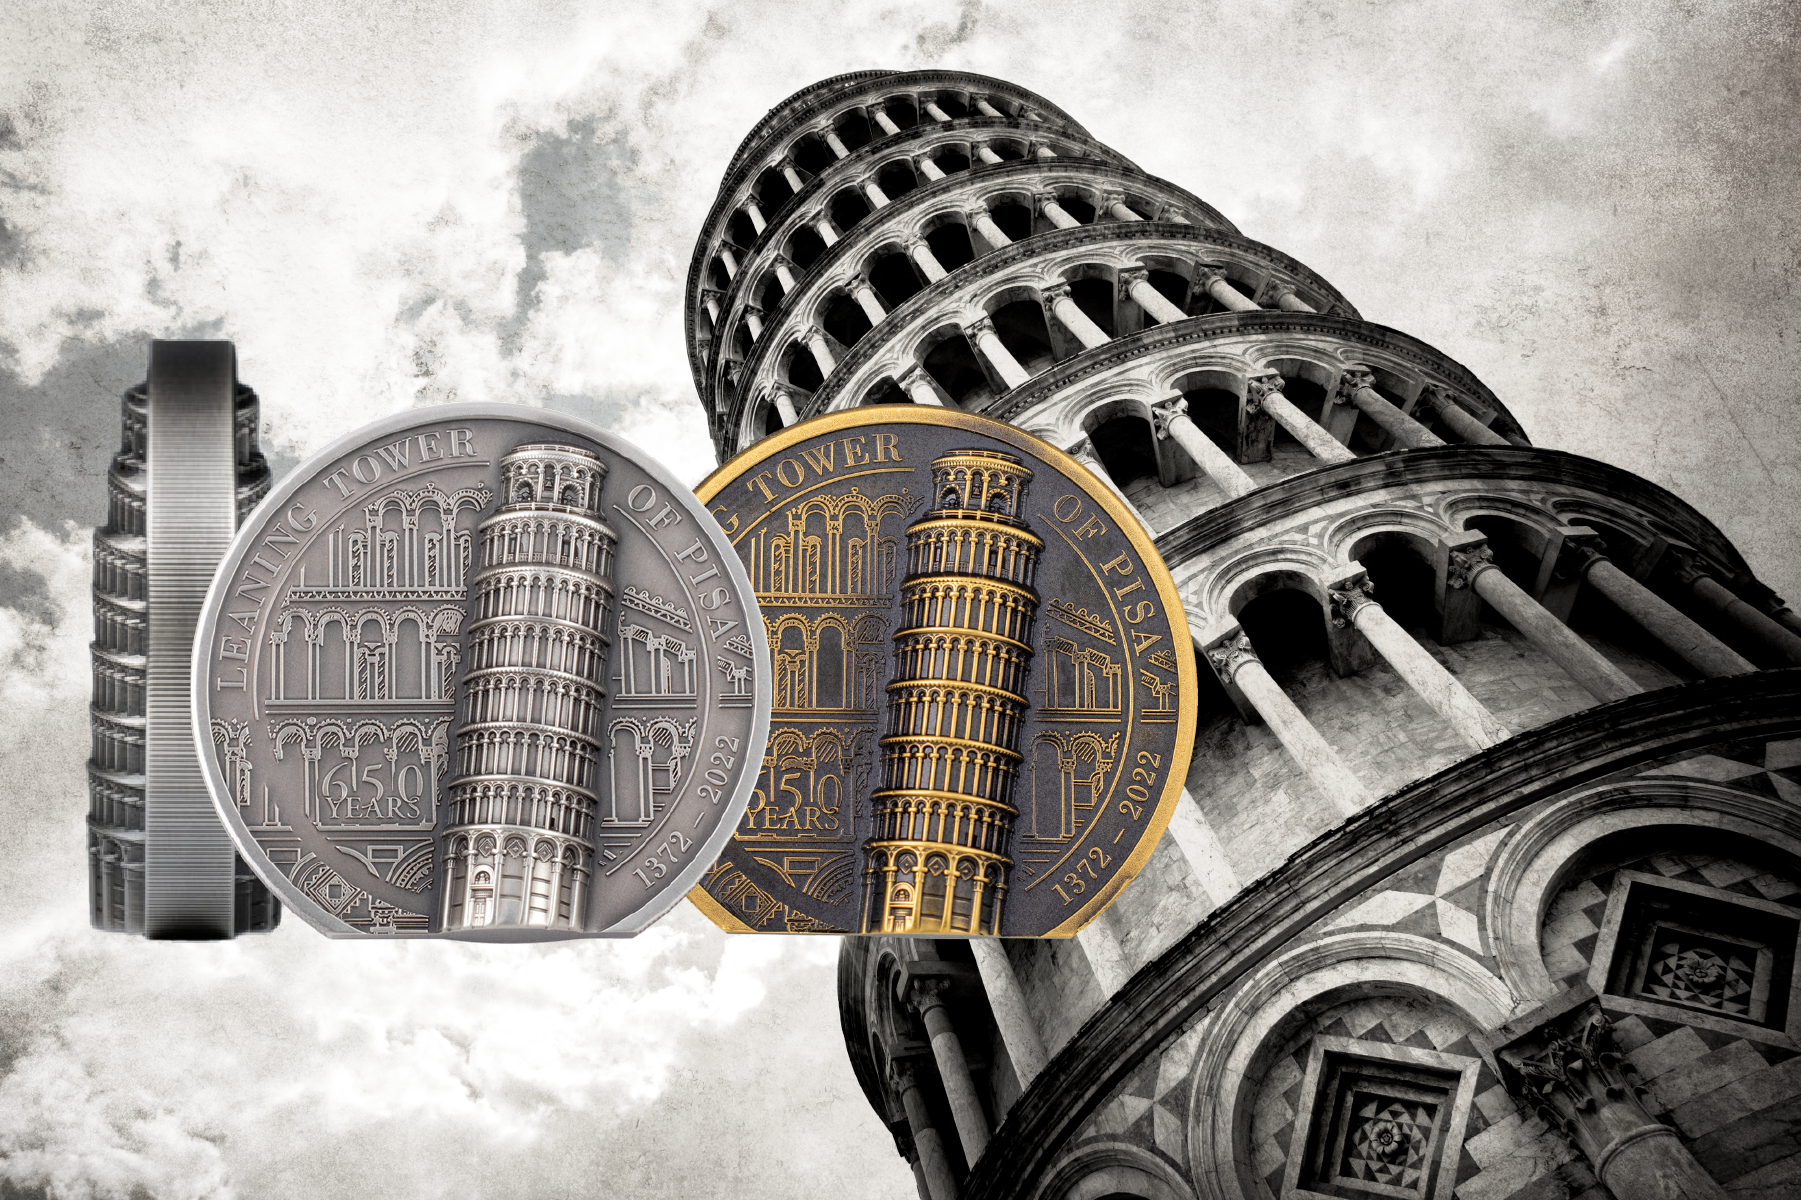 leaning tower of pisa coin collection 2022